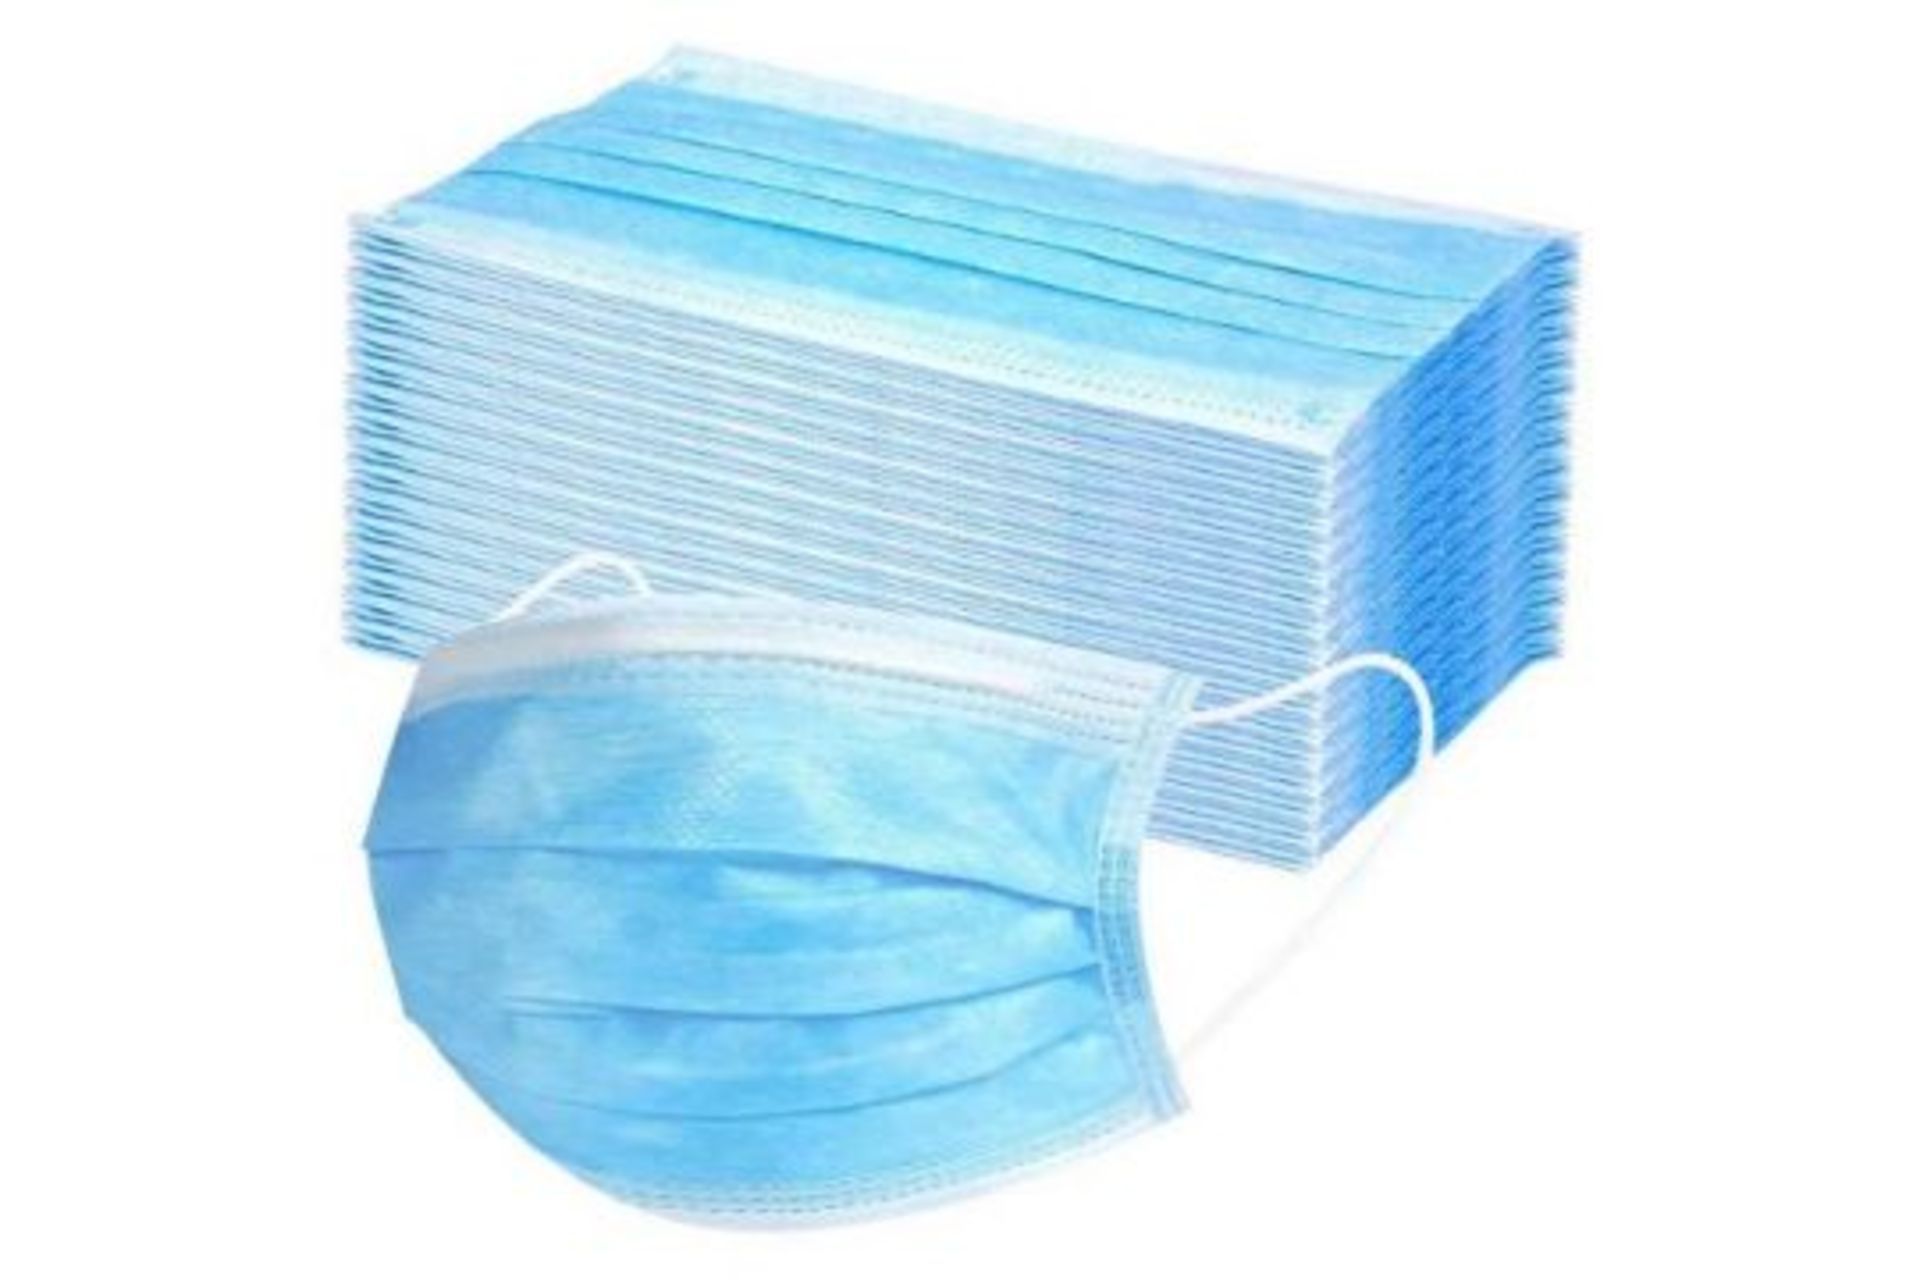 NEW BOX OF 50 3PLY DISPOSABLE FACE MASKS. NON MEDICAL